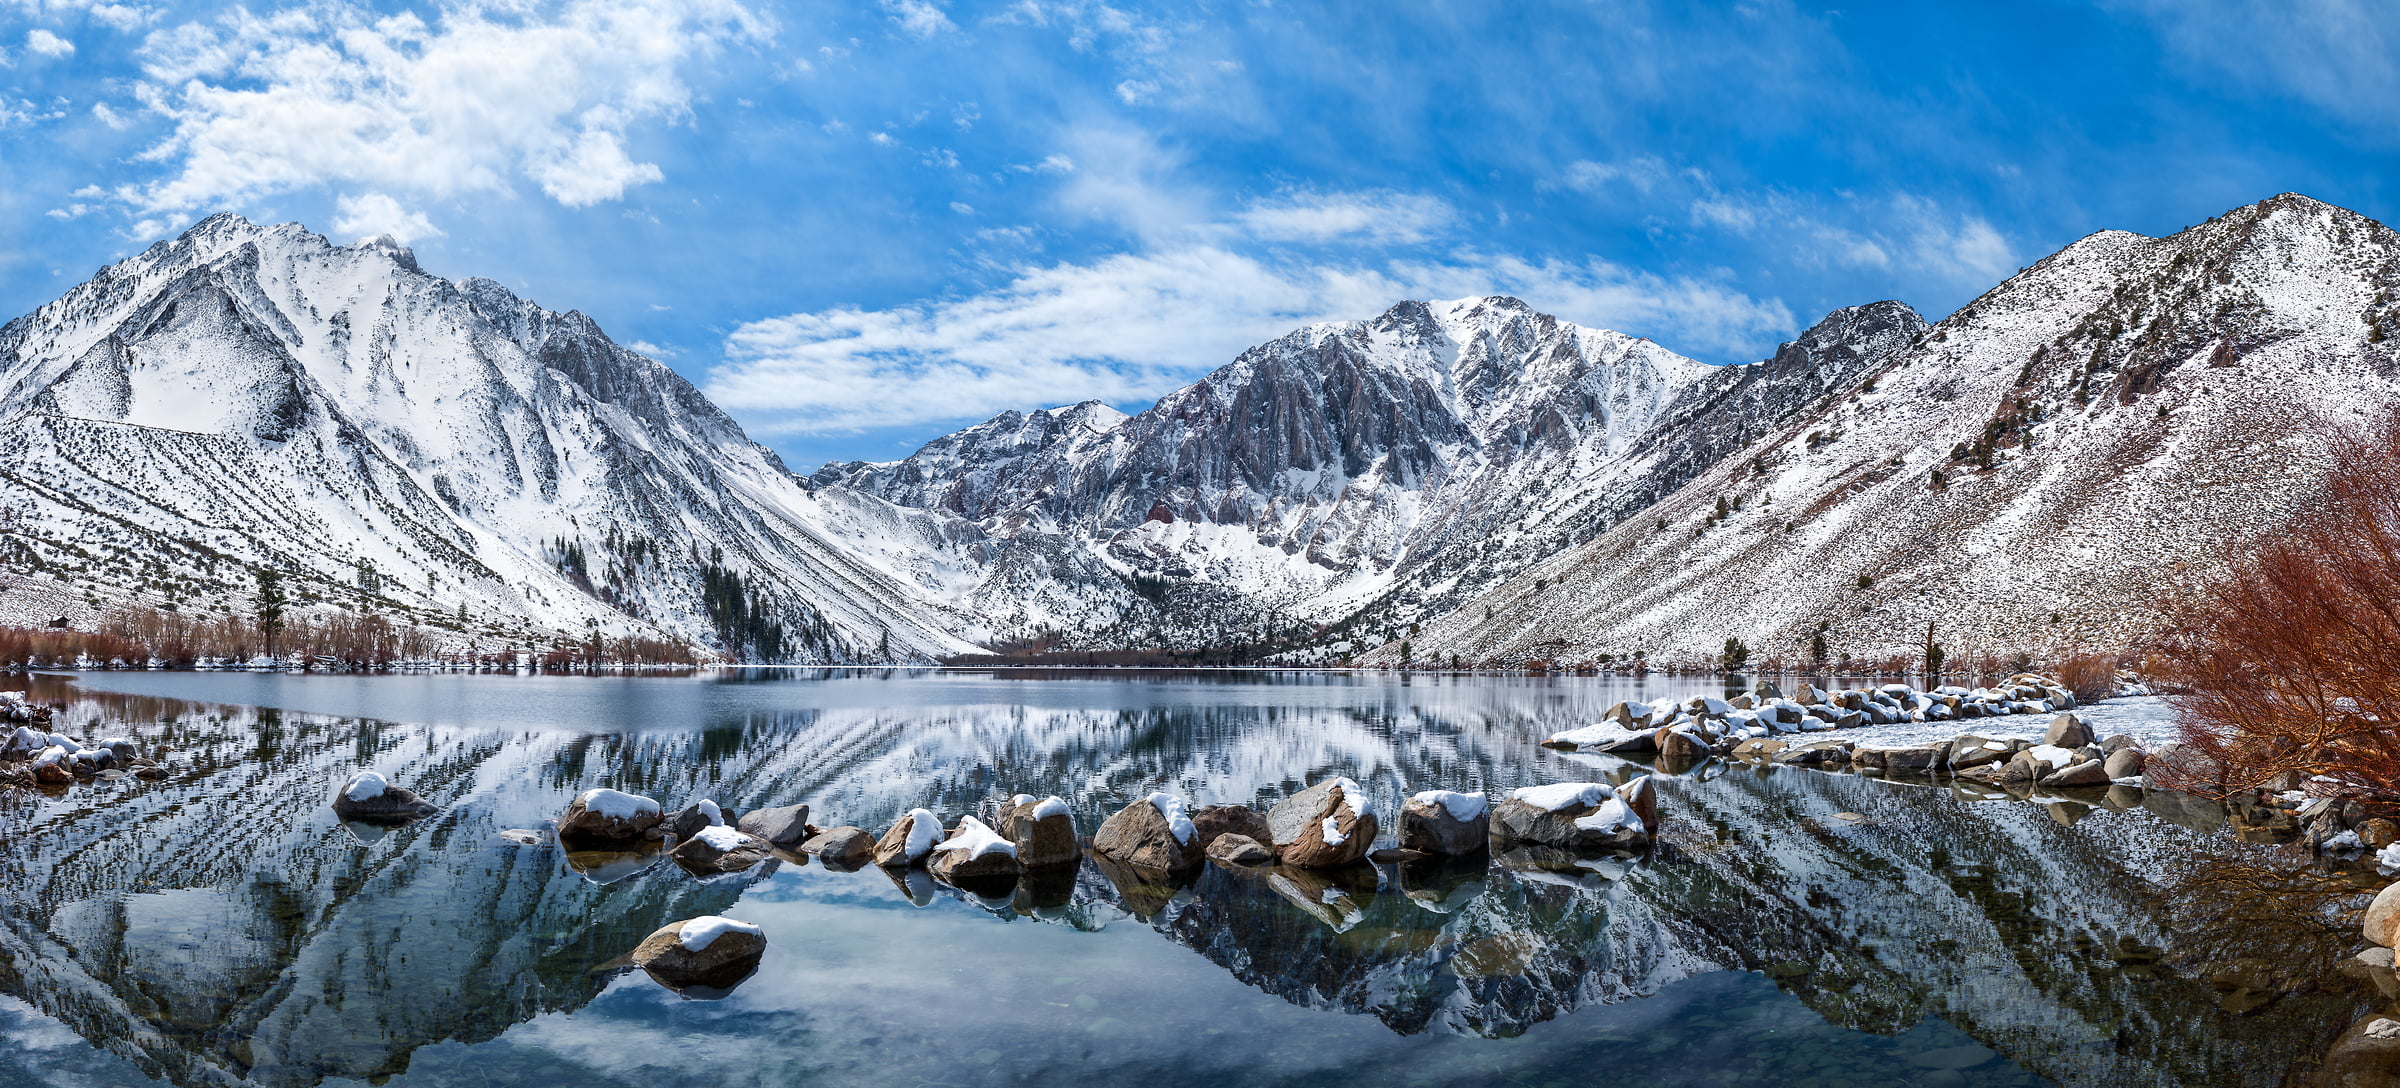 649 megapixels! A very high resolution, large-format VAST photo of mountains with snow and an alpine lake in winter; landscape photograph created by Jim Tarpo in Mono County, California.